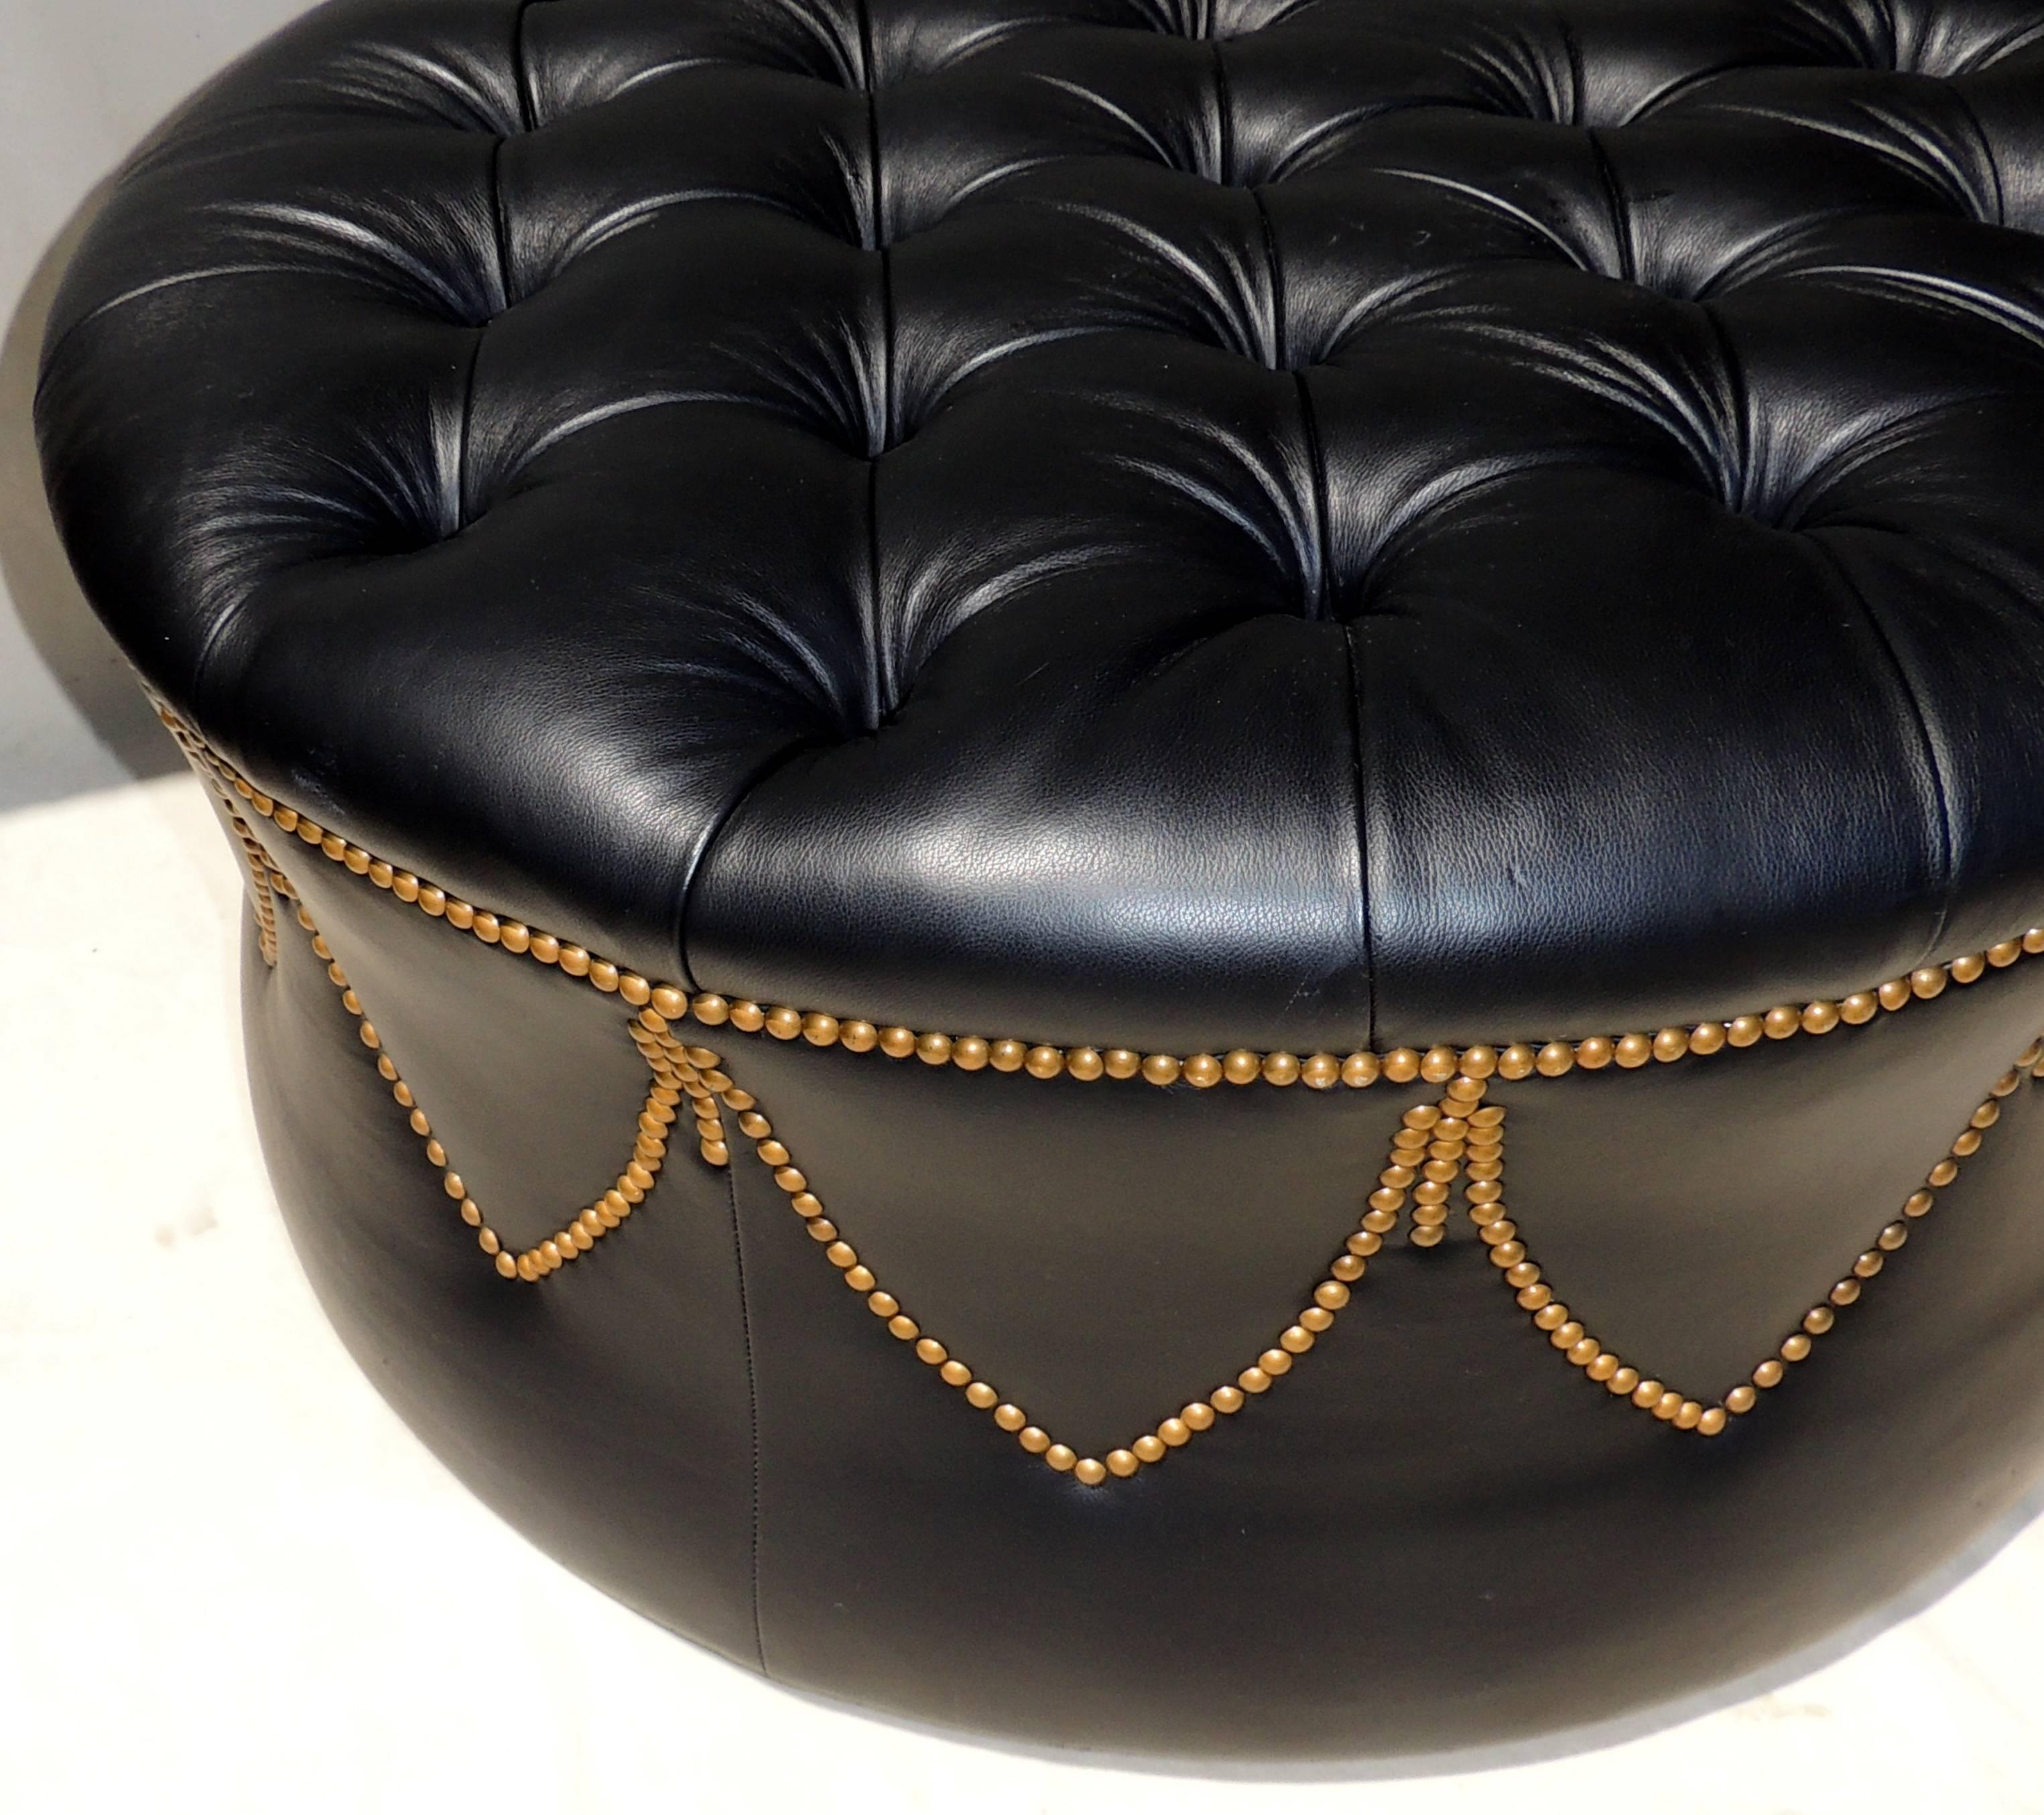 20th Century Handsome Black Leather Brass Nailhead Tufted Pouf Ottoman Round Bench Foot Rest